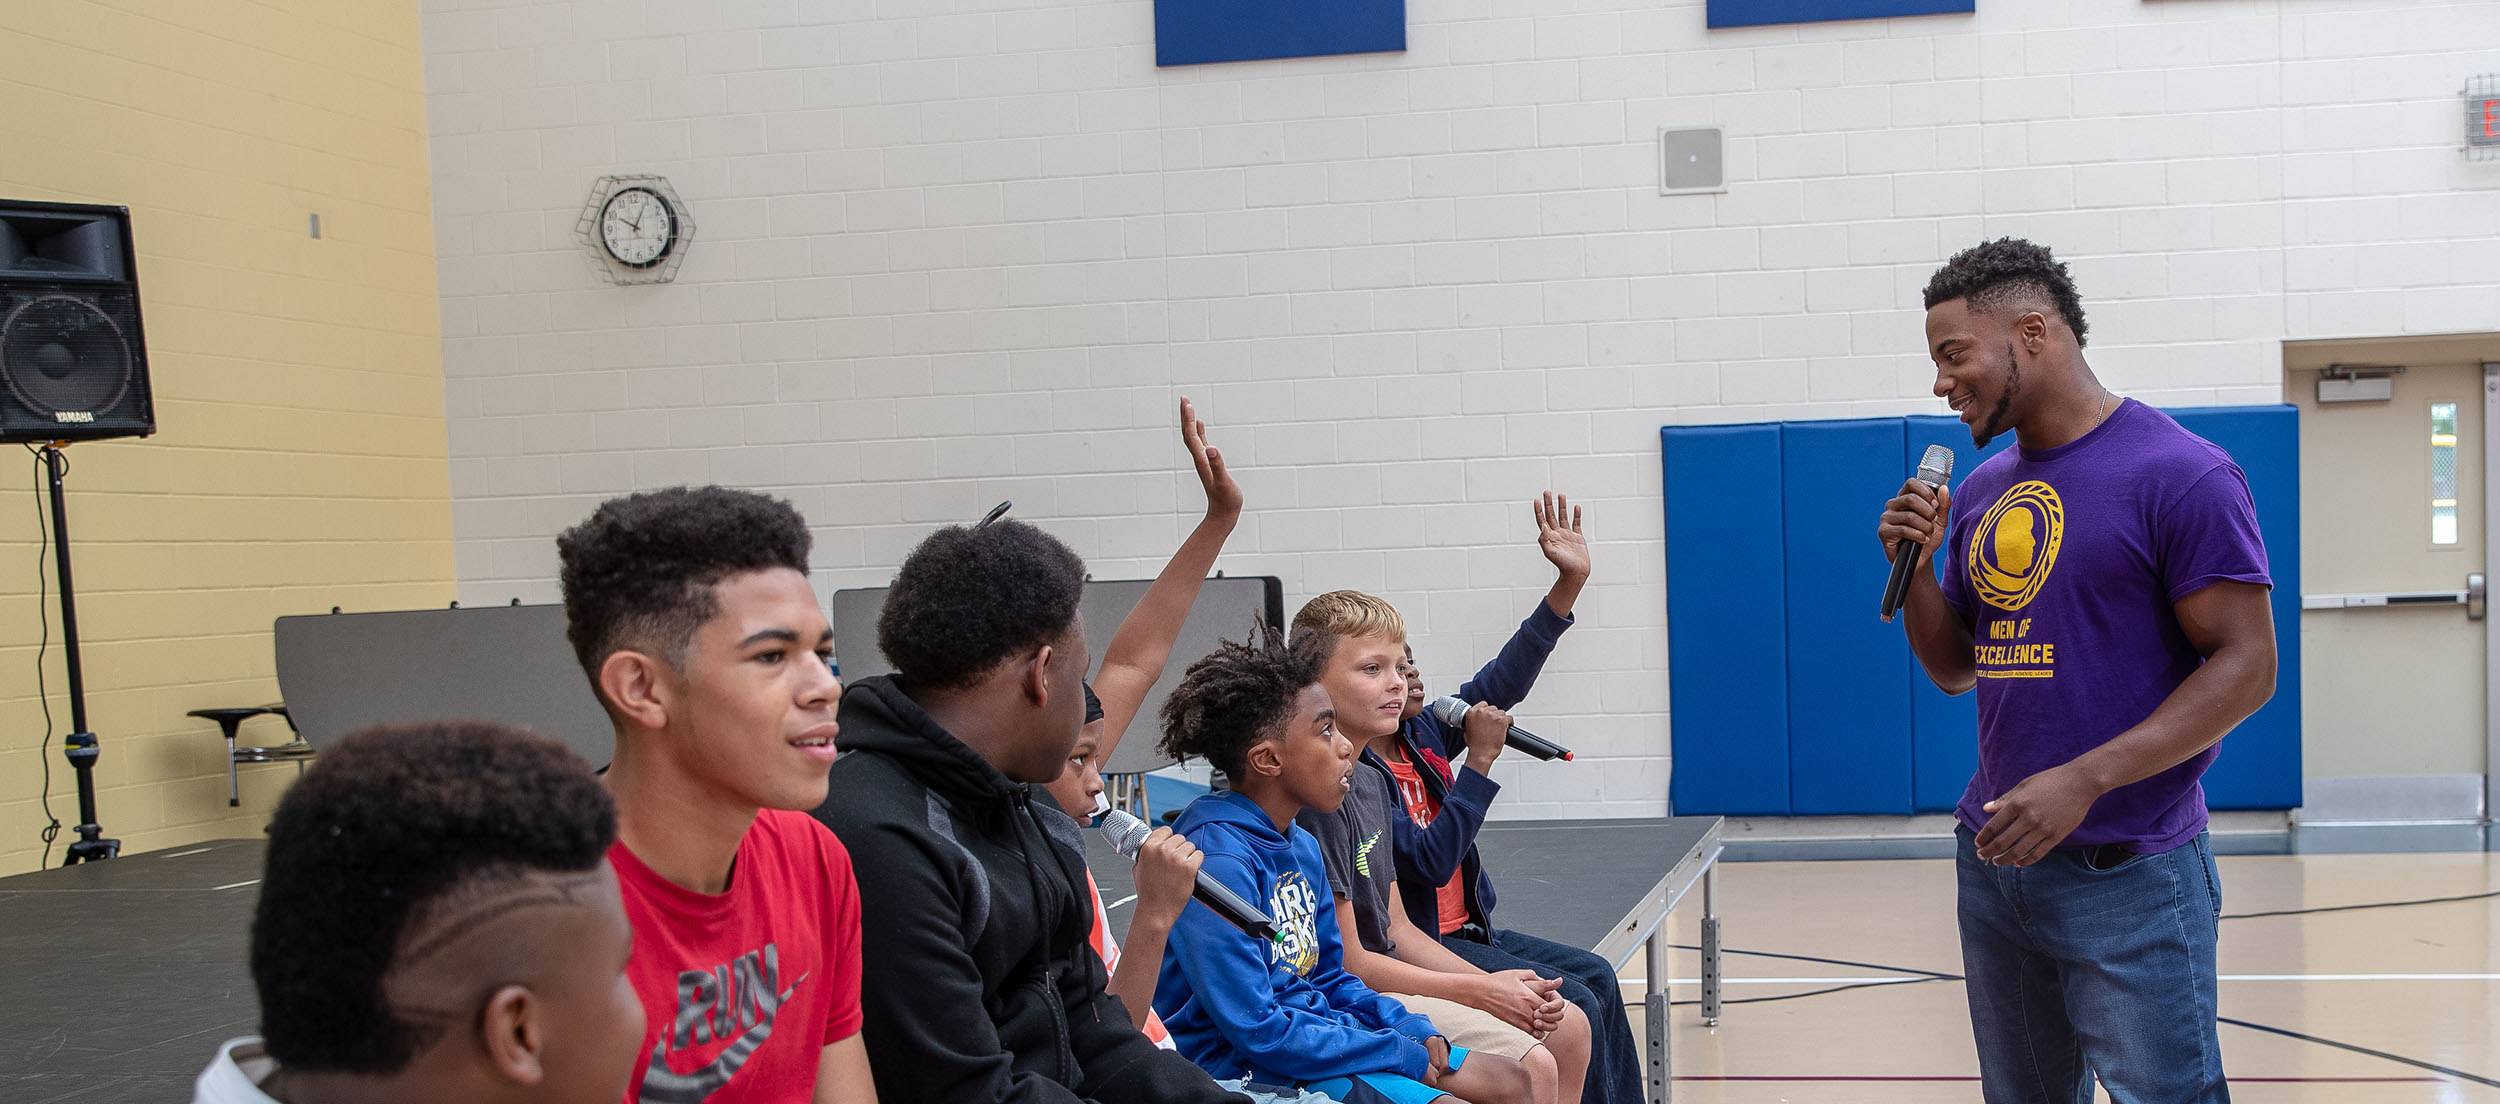 Man talking with a group of boys in a gym